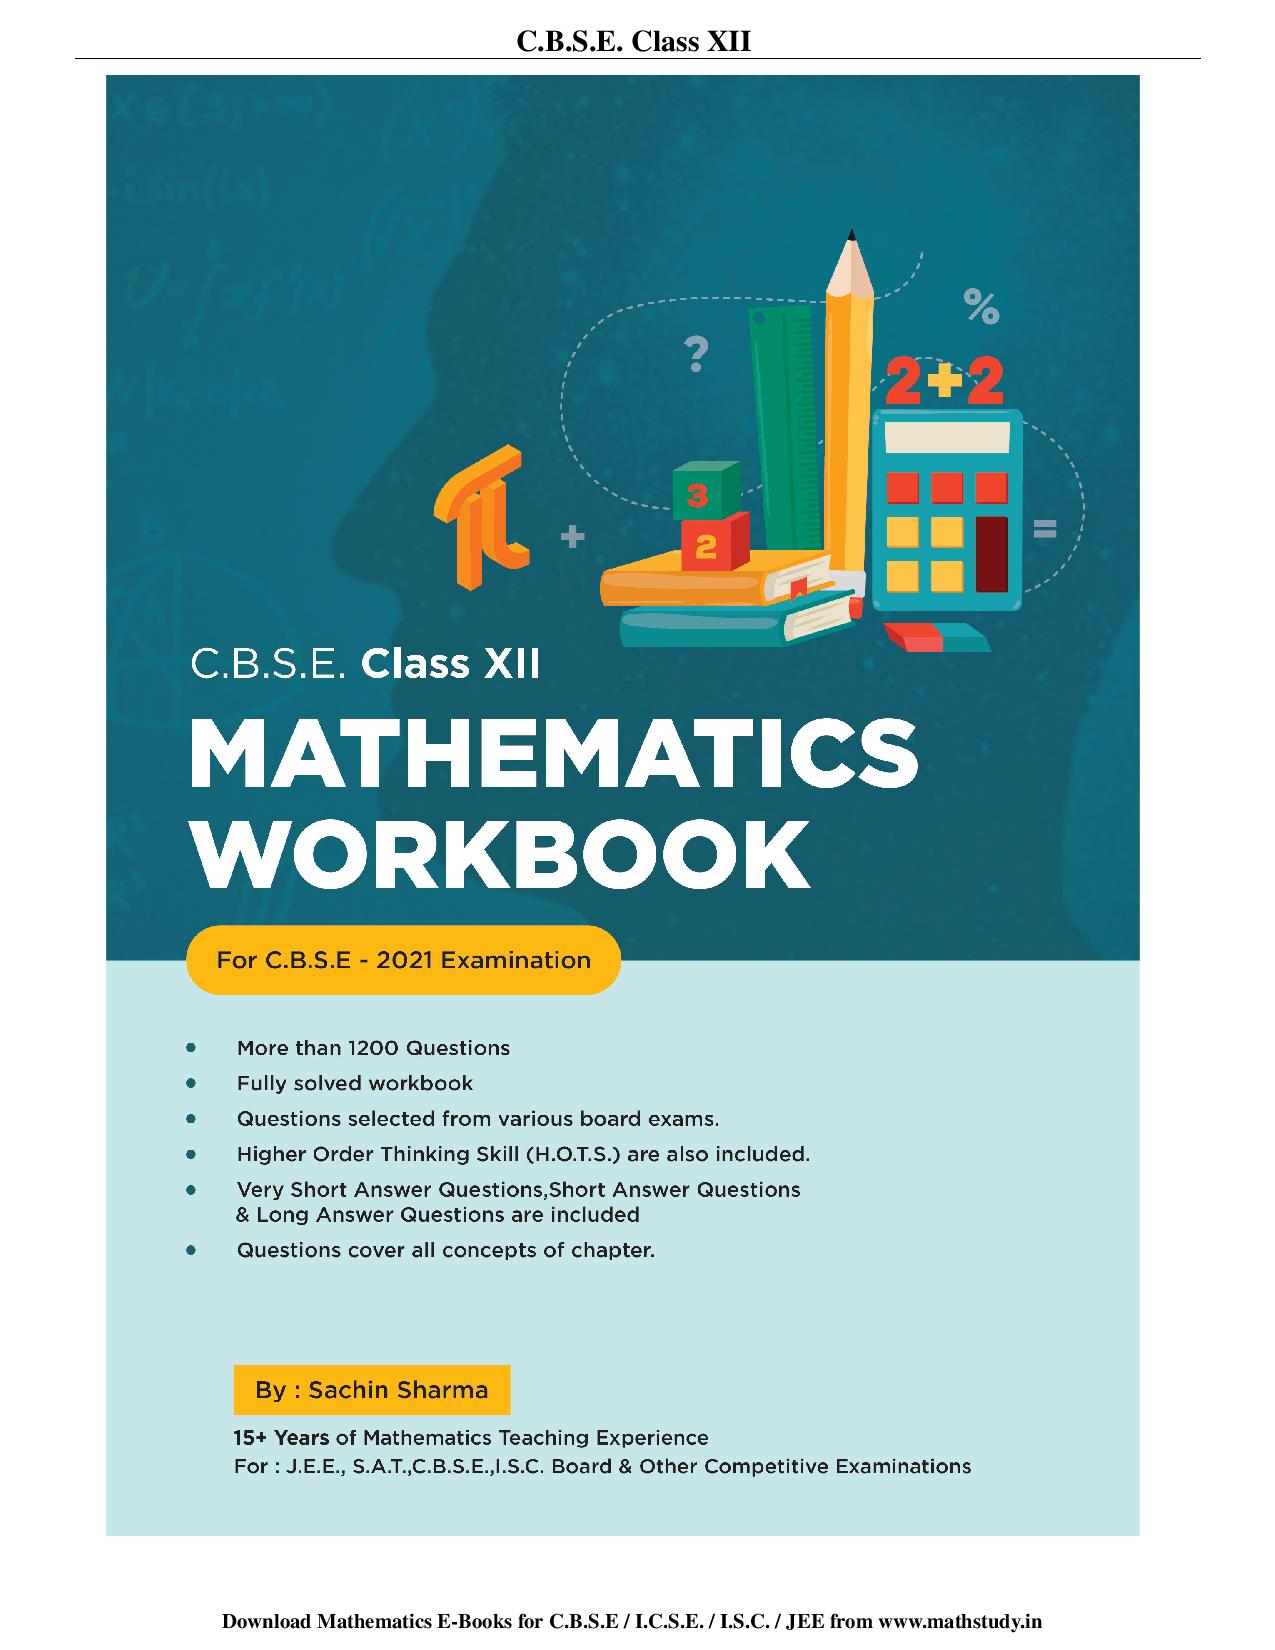 You are currently viewing work book class 12 mathematics